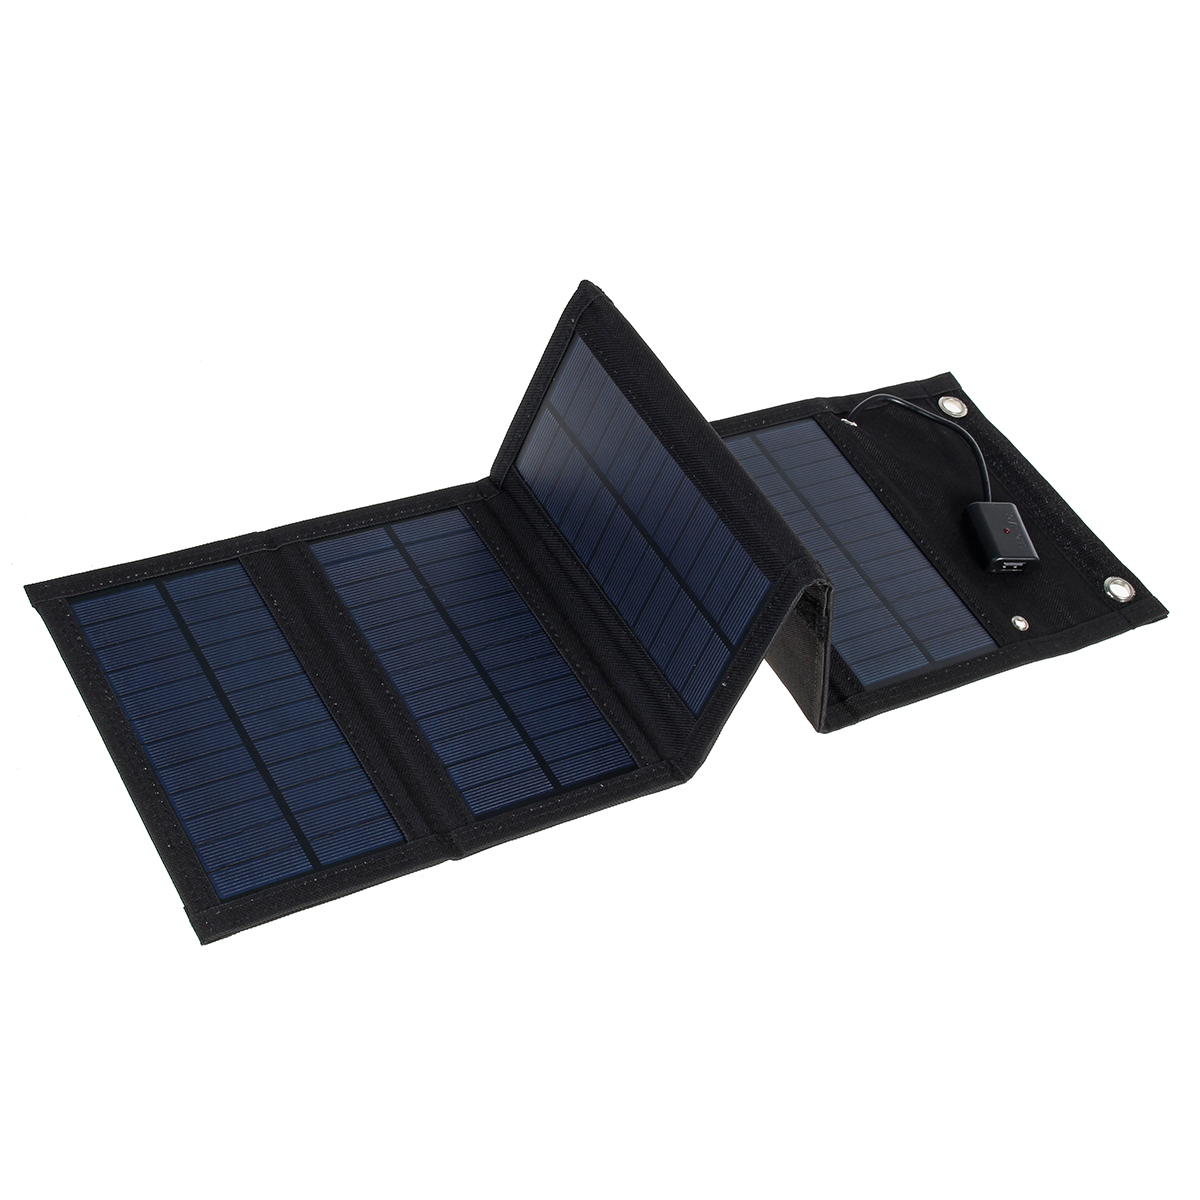 80W-Foldable-USB-Solar-Panel-Portable-Folding-Waterproof-Solar-Panel-Charger-Outdoor-Mobile-Power-Ba-1806137-6